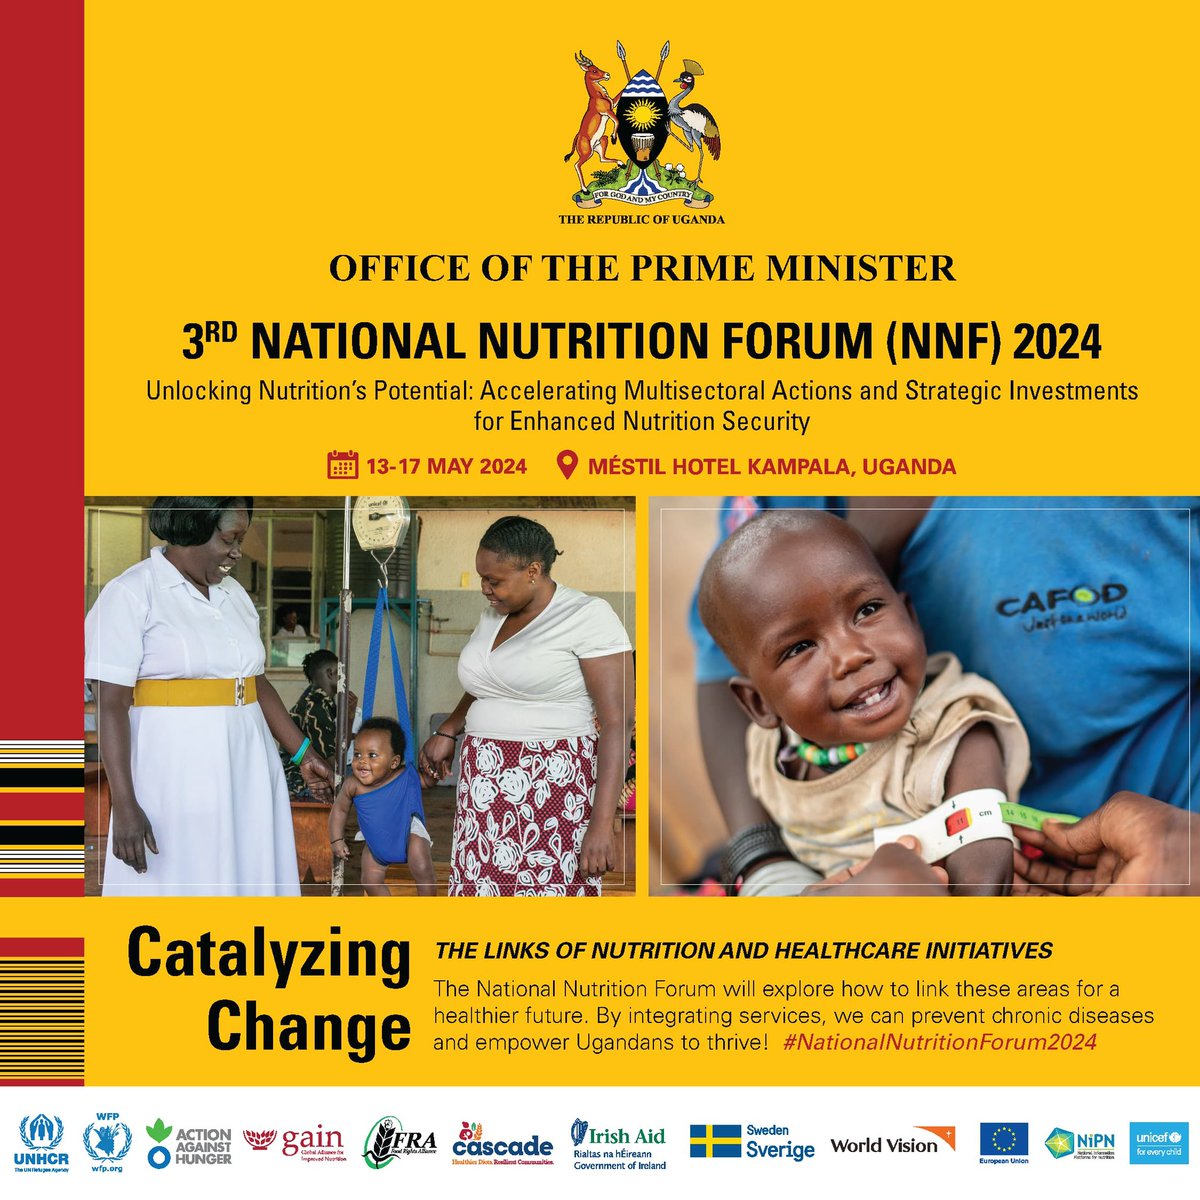 Mark your calendars for the 3rd National Nutrition Forum (NNF) 2024, #NationalNutritionForum2024 taking place from May 13th to 17th at Mestil Hotel! This year's theme is 'Unlocking Nutrition's Potential: Accelerating Multisectoral Actions and Strategic Investments for Enhanced…